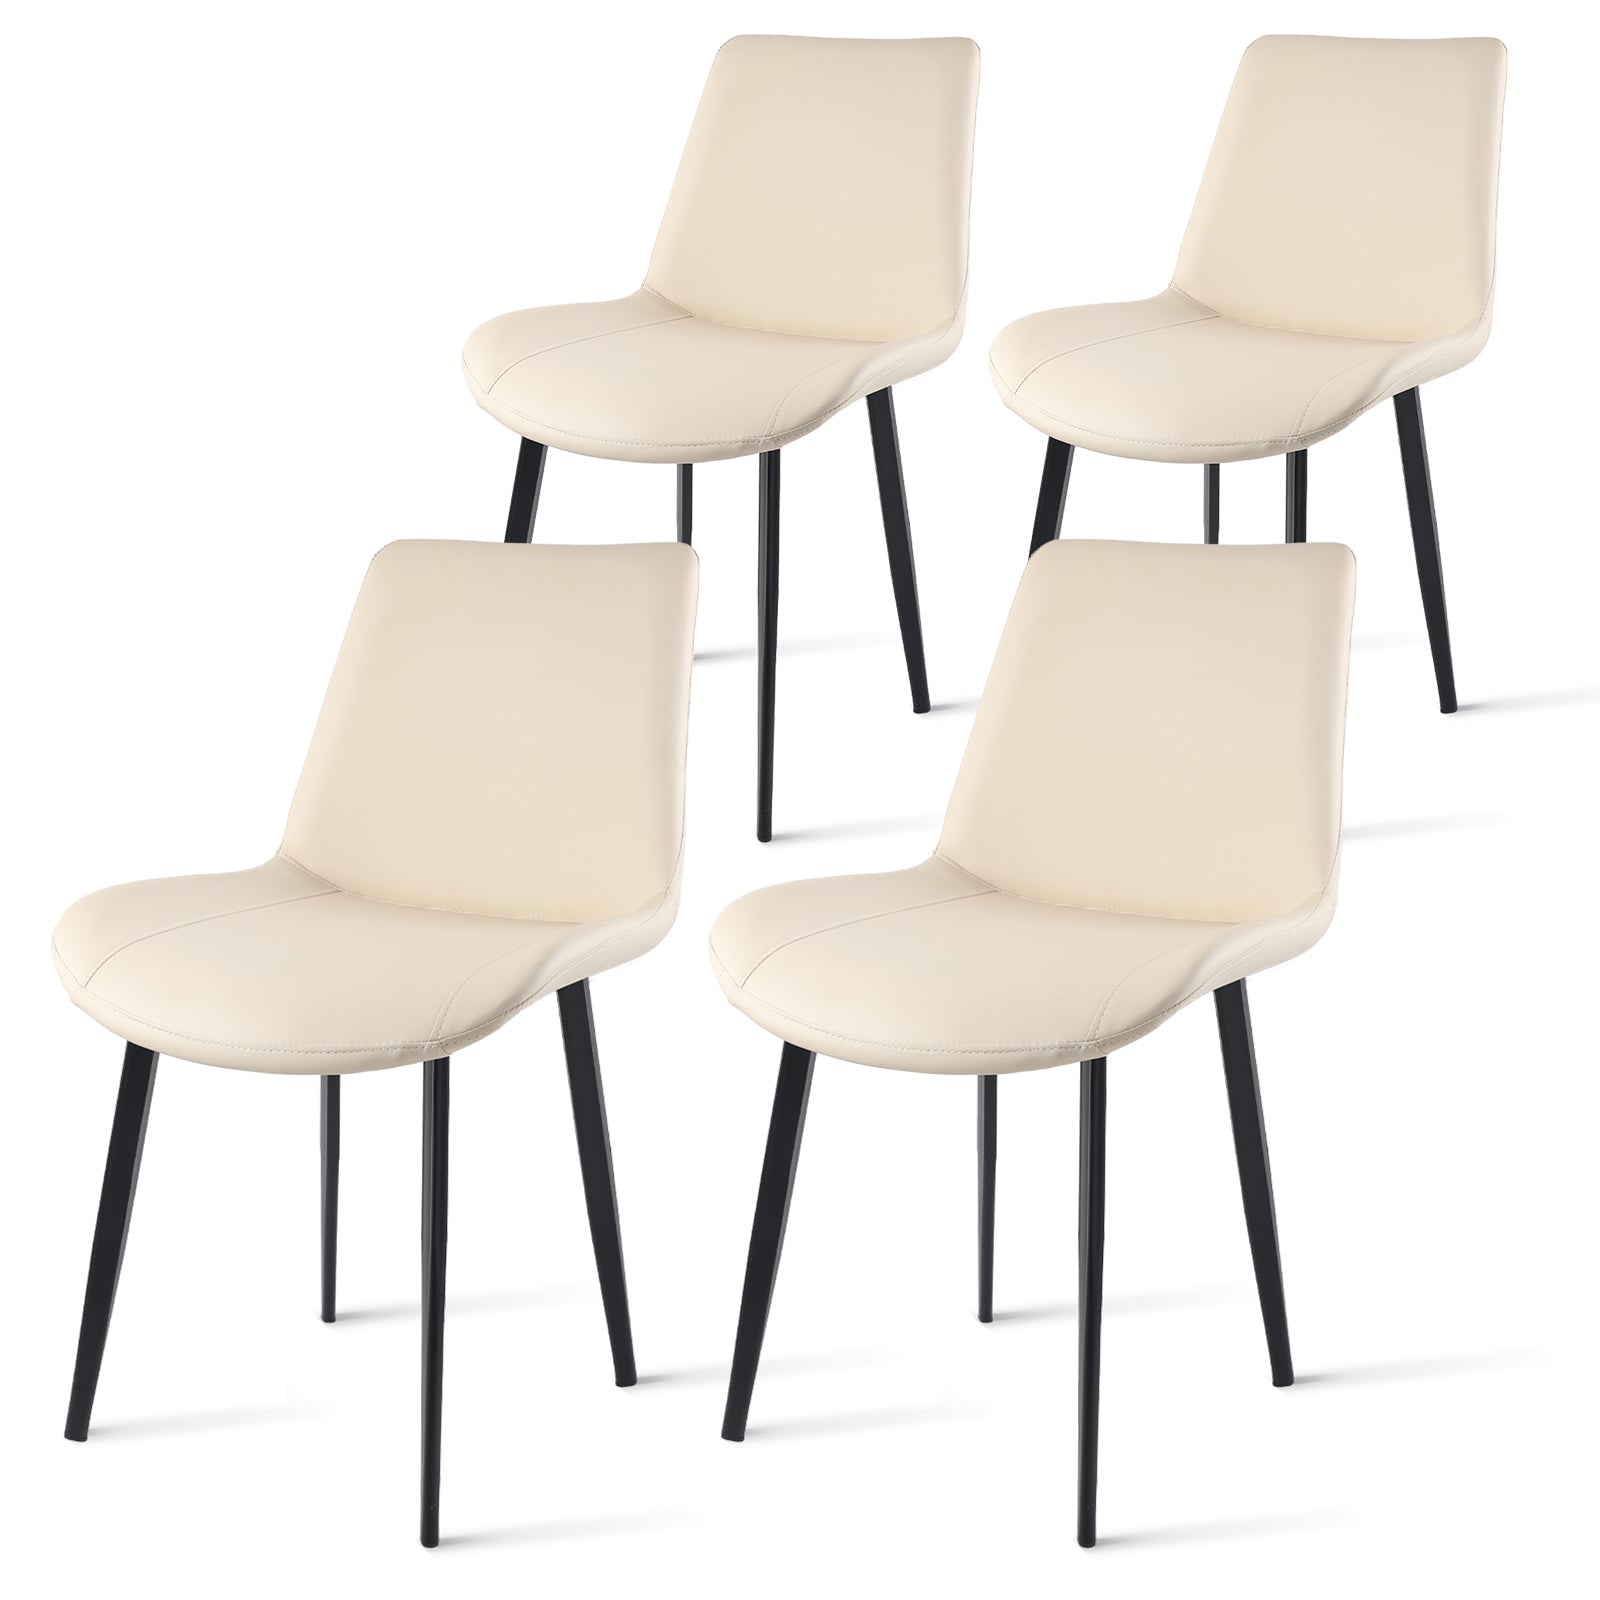 Beige Pu Leather Dining Chair With Metal Legs,